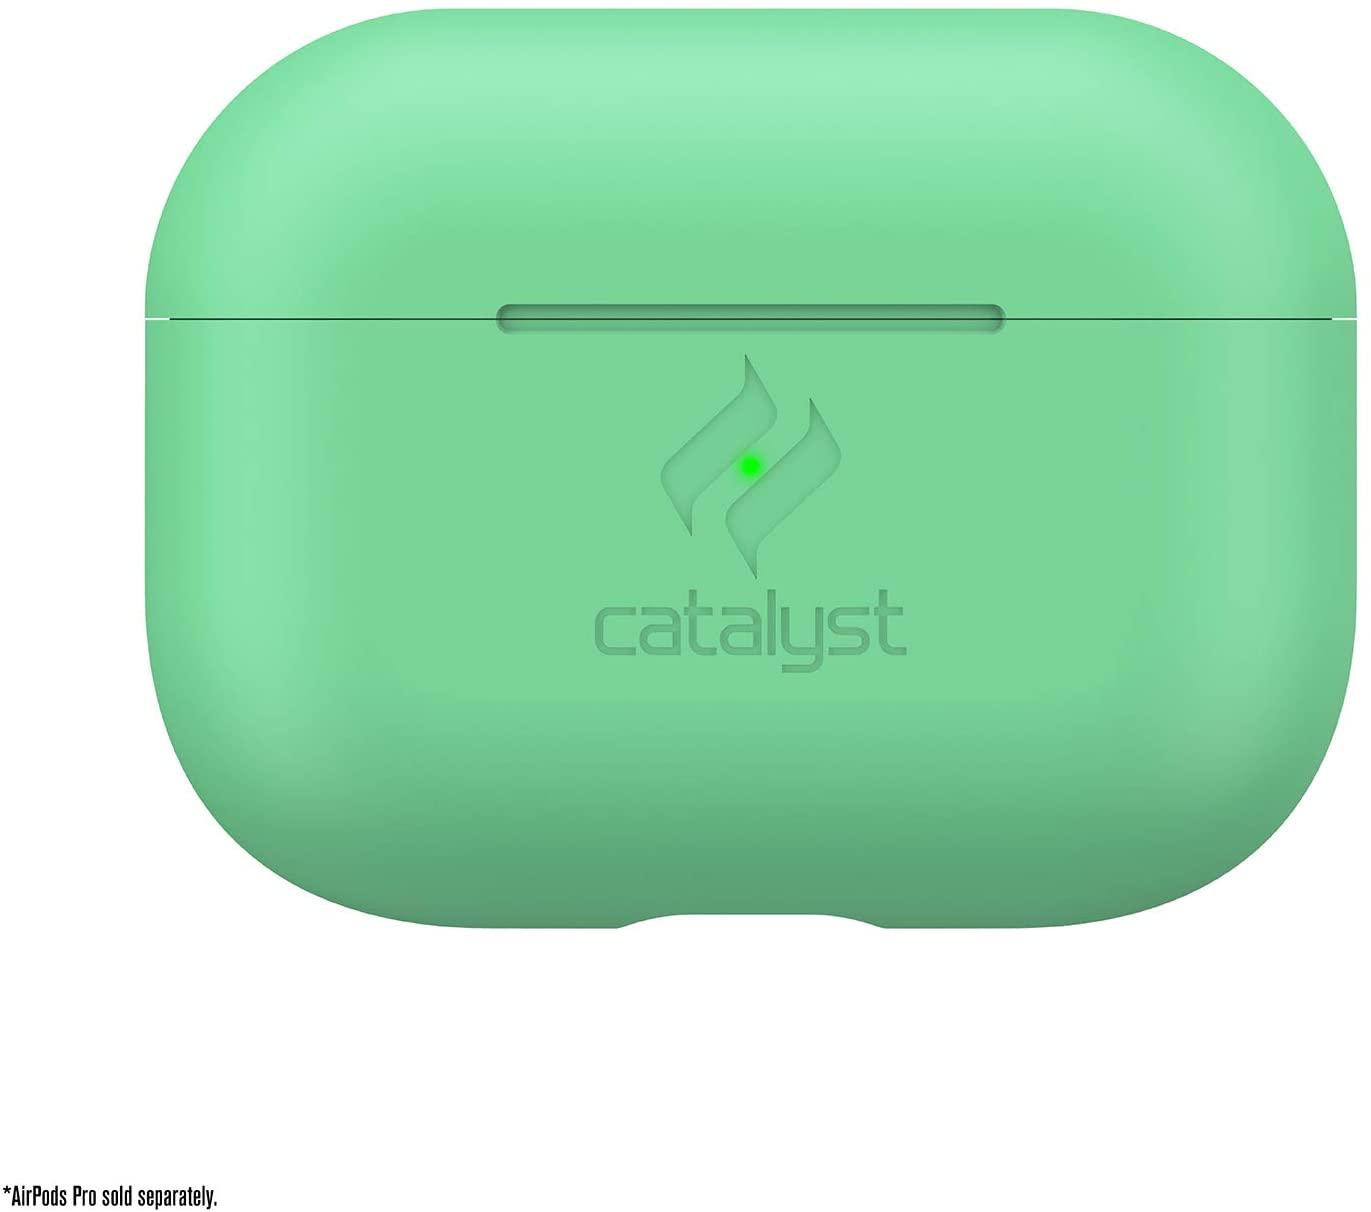 catalyst slim case for airpods pro mint green